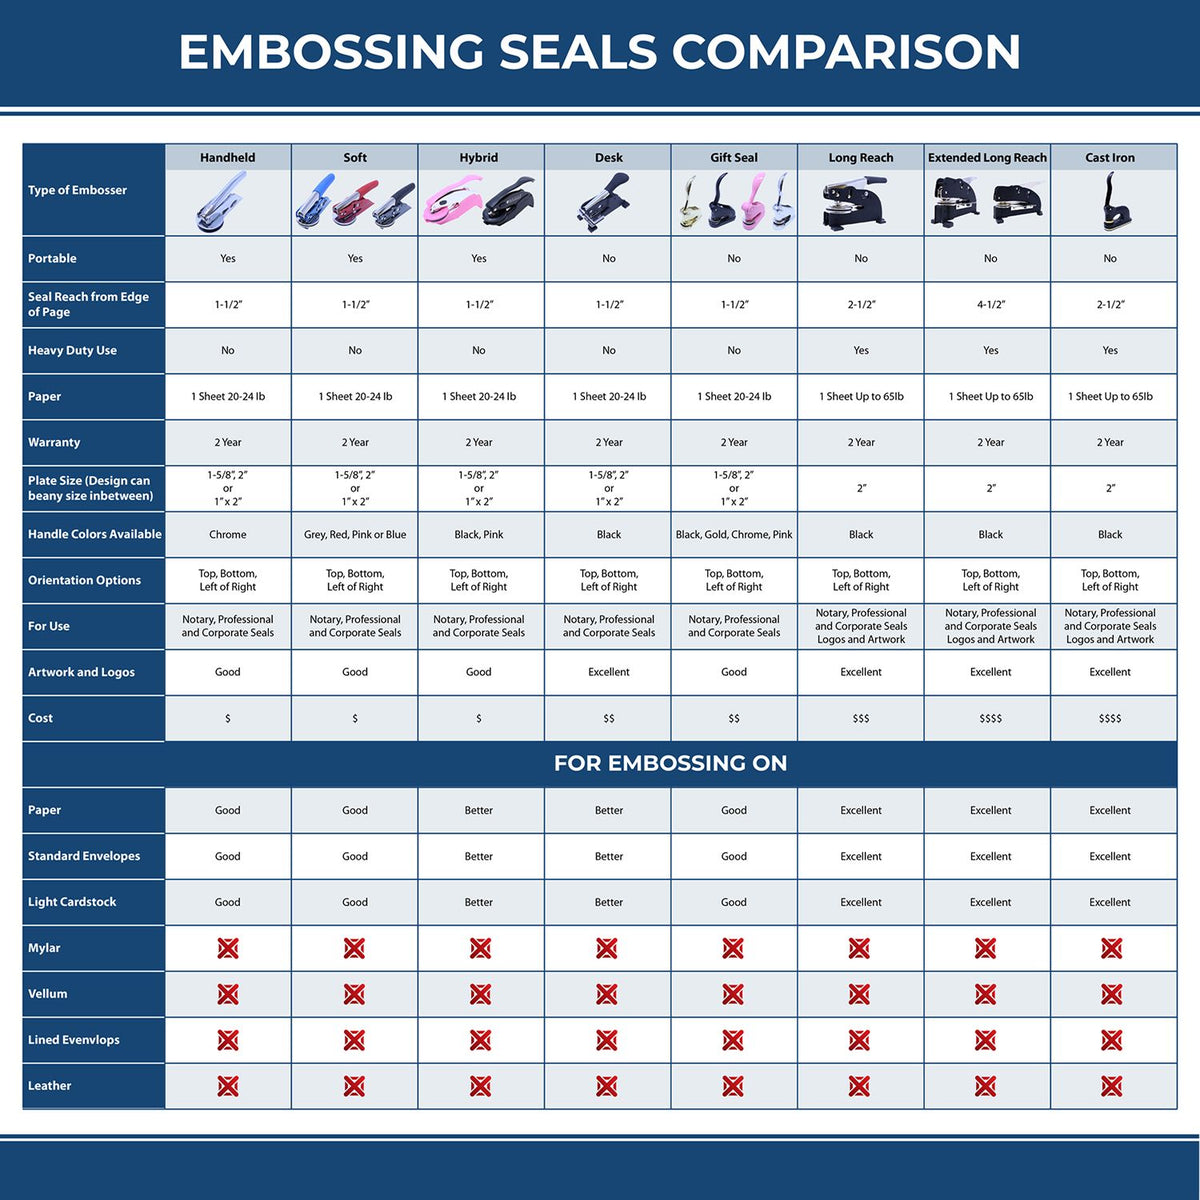 A comparison chart for the different types of mount models available for the State of Arkansas Soft Land Surveyor Embossing Seal.